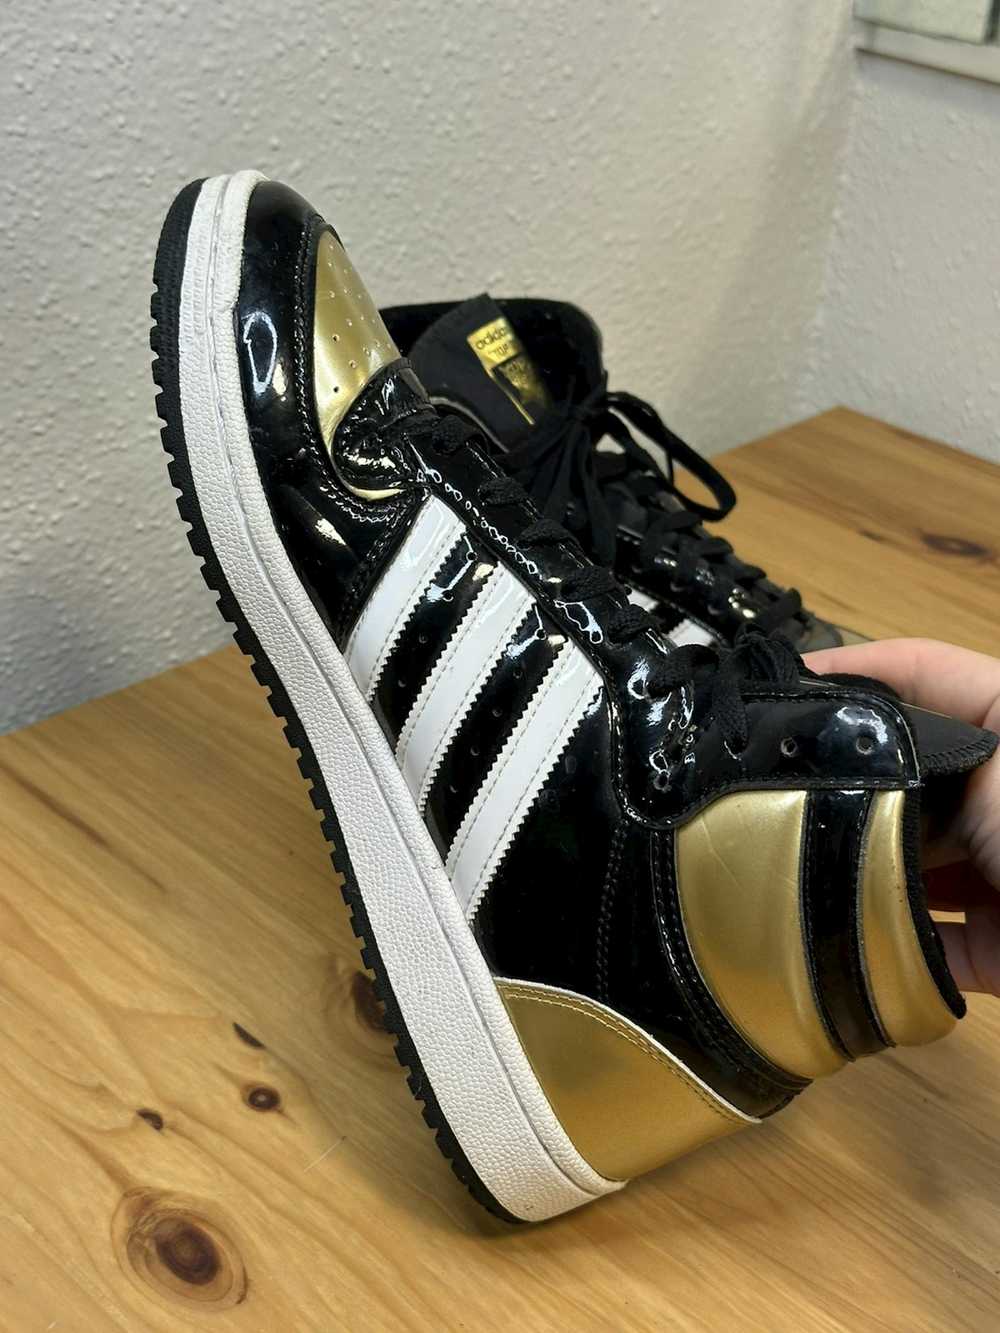 Adidas Top Ten RB Black Gold Patent size 9 - image 3